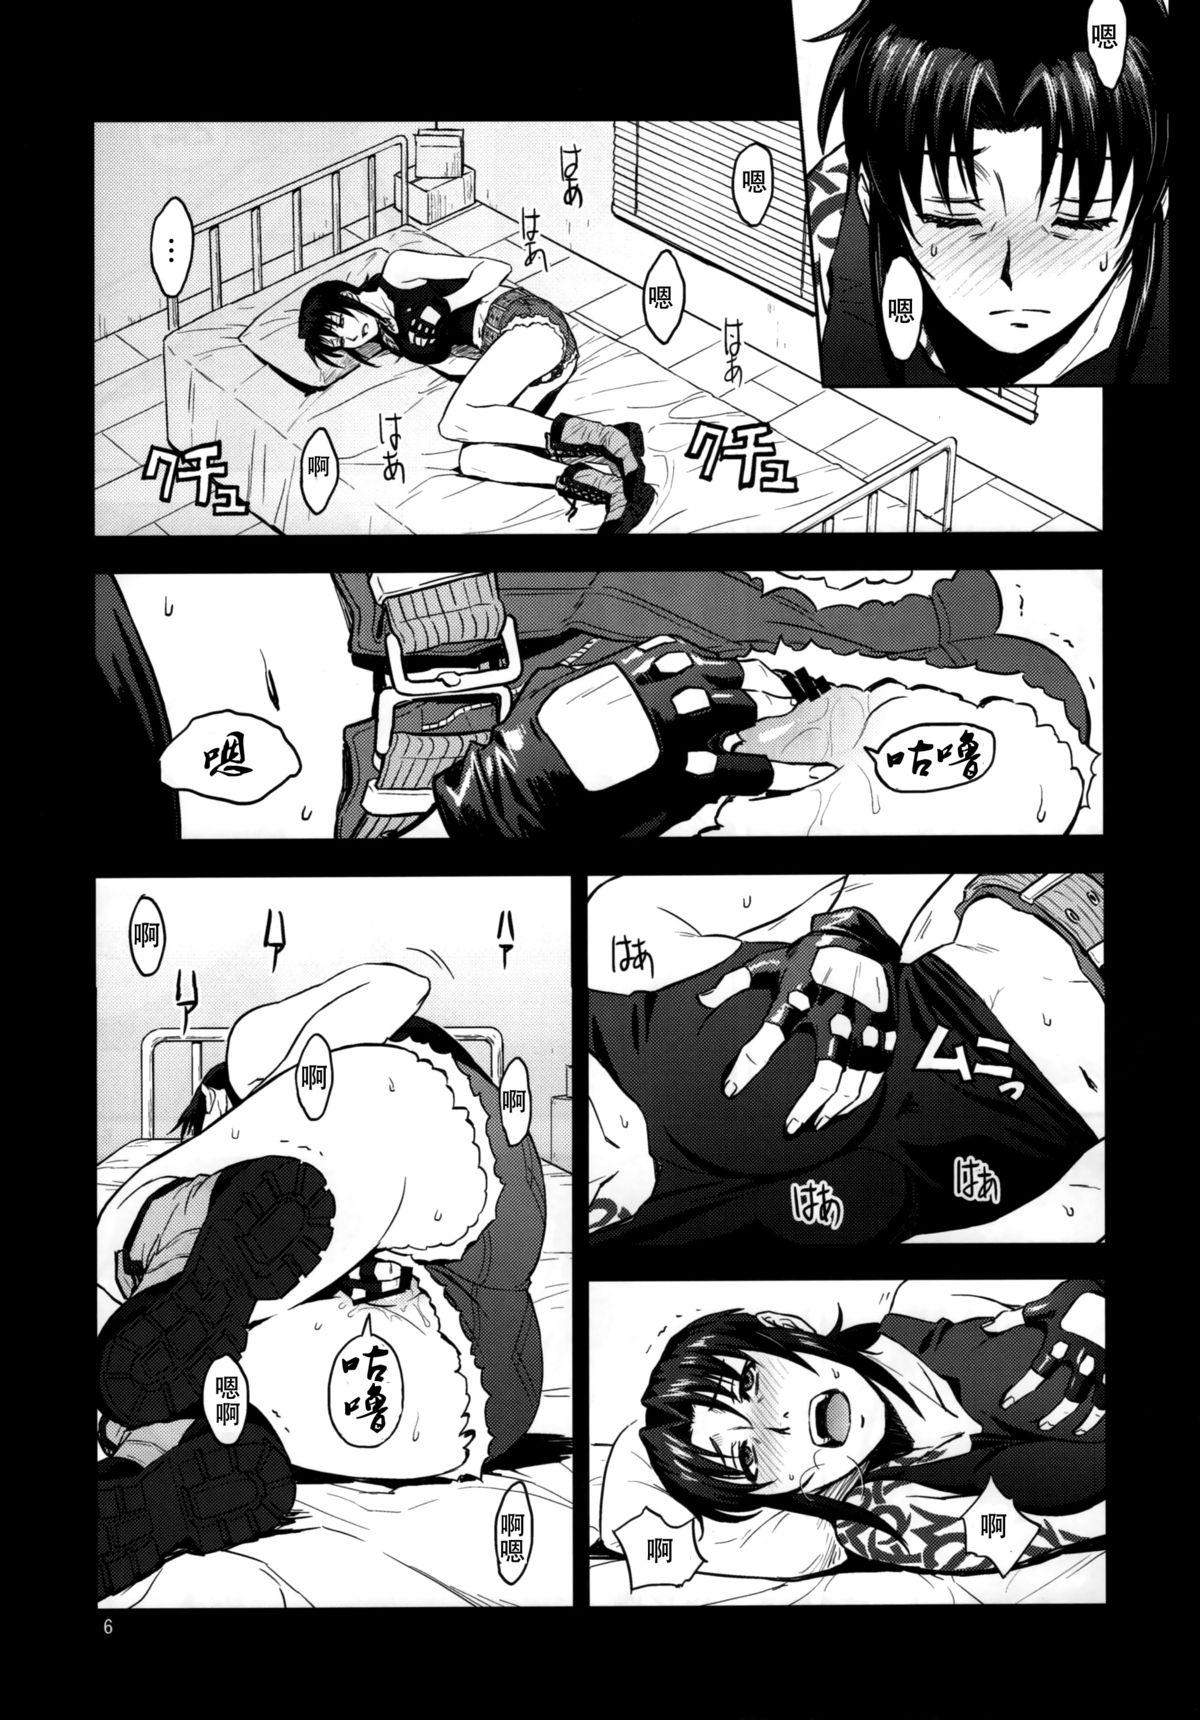 Dance Sick from drinking - Black lagoon Couple - Page 7